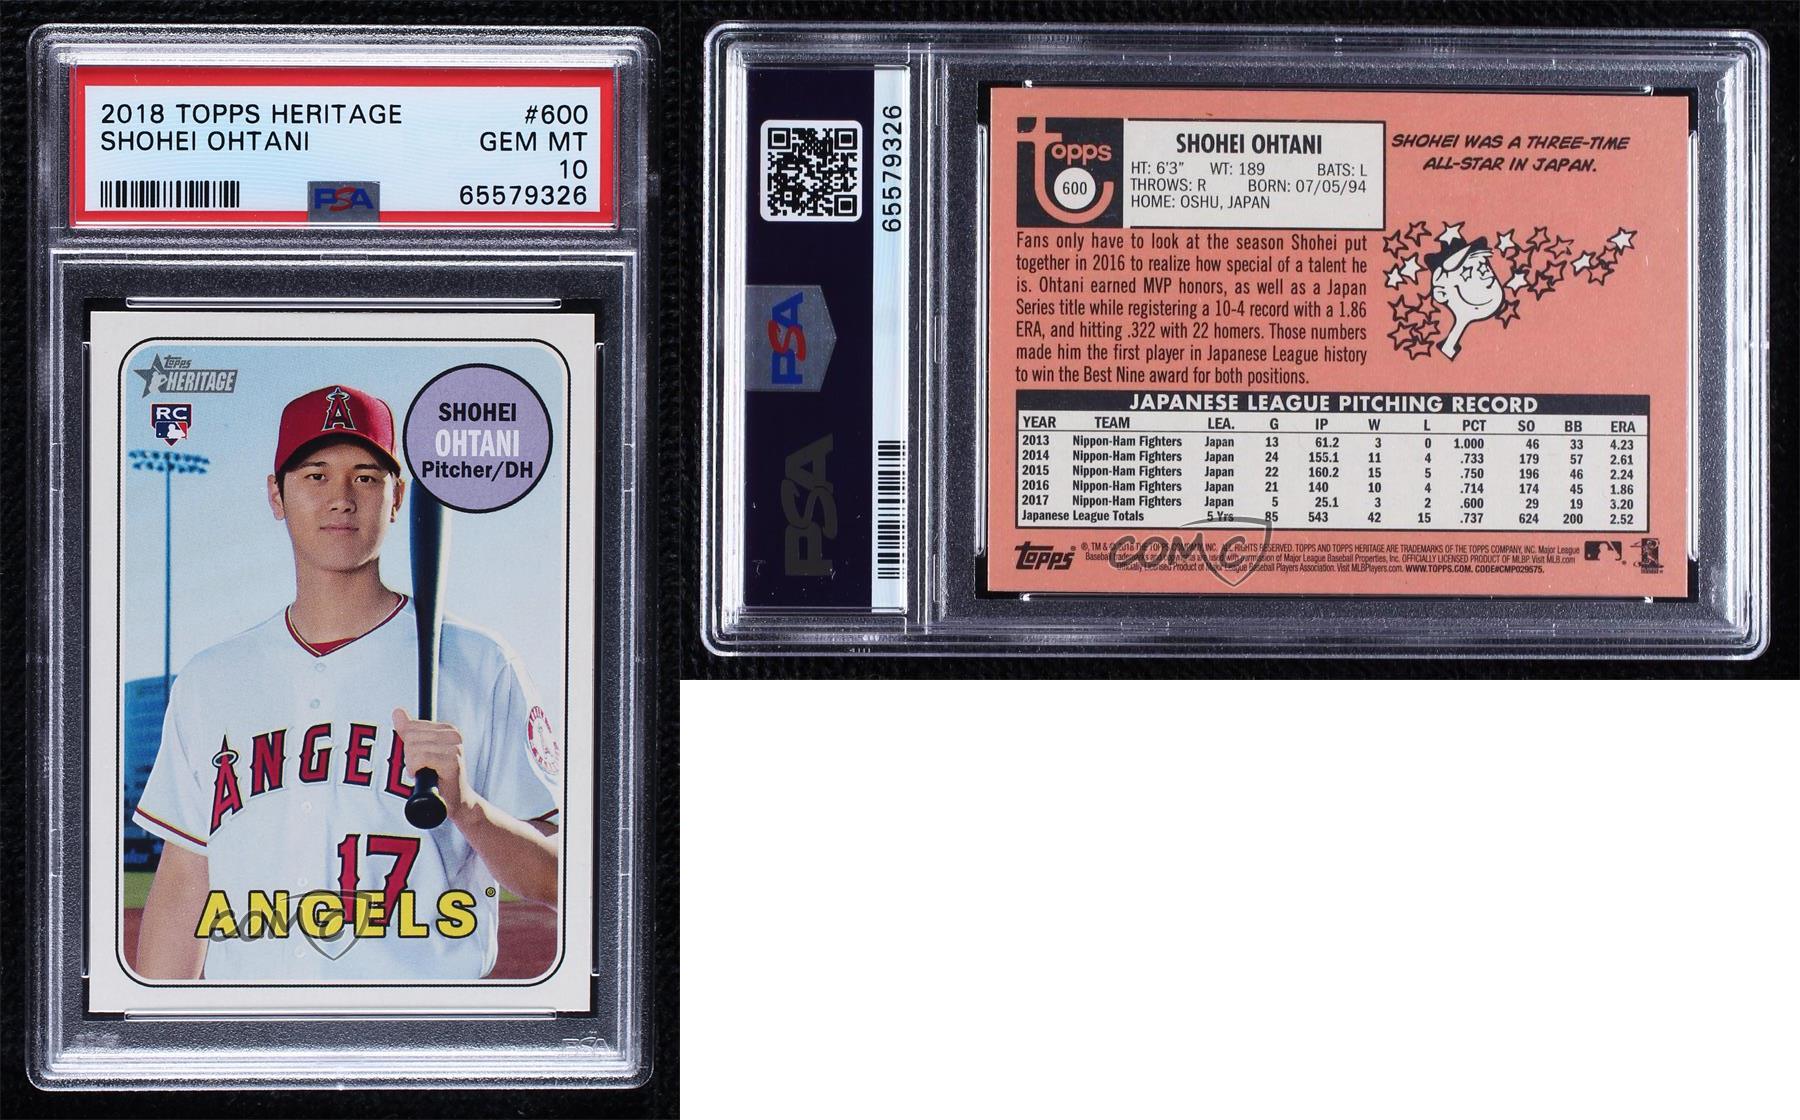 2018 Topps Heritage High Number Shohei Ohtani #600.1 PSA 10 GEM MT Rookie RC